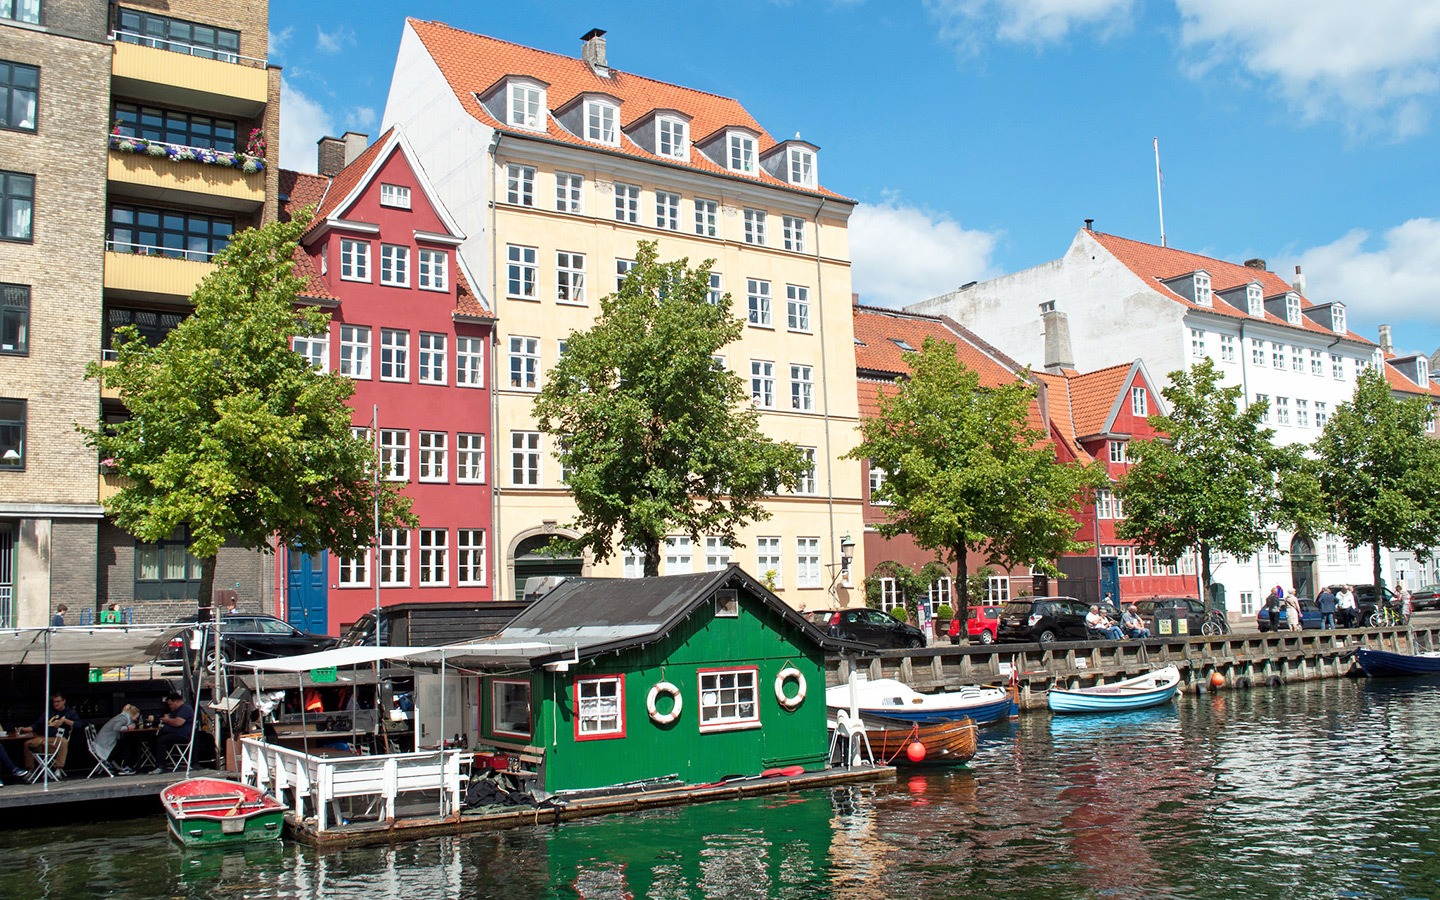 Boats and colourful buildings by he canal in Christianshavn in Copenhagen